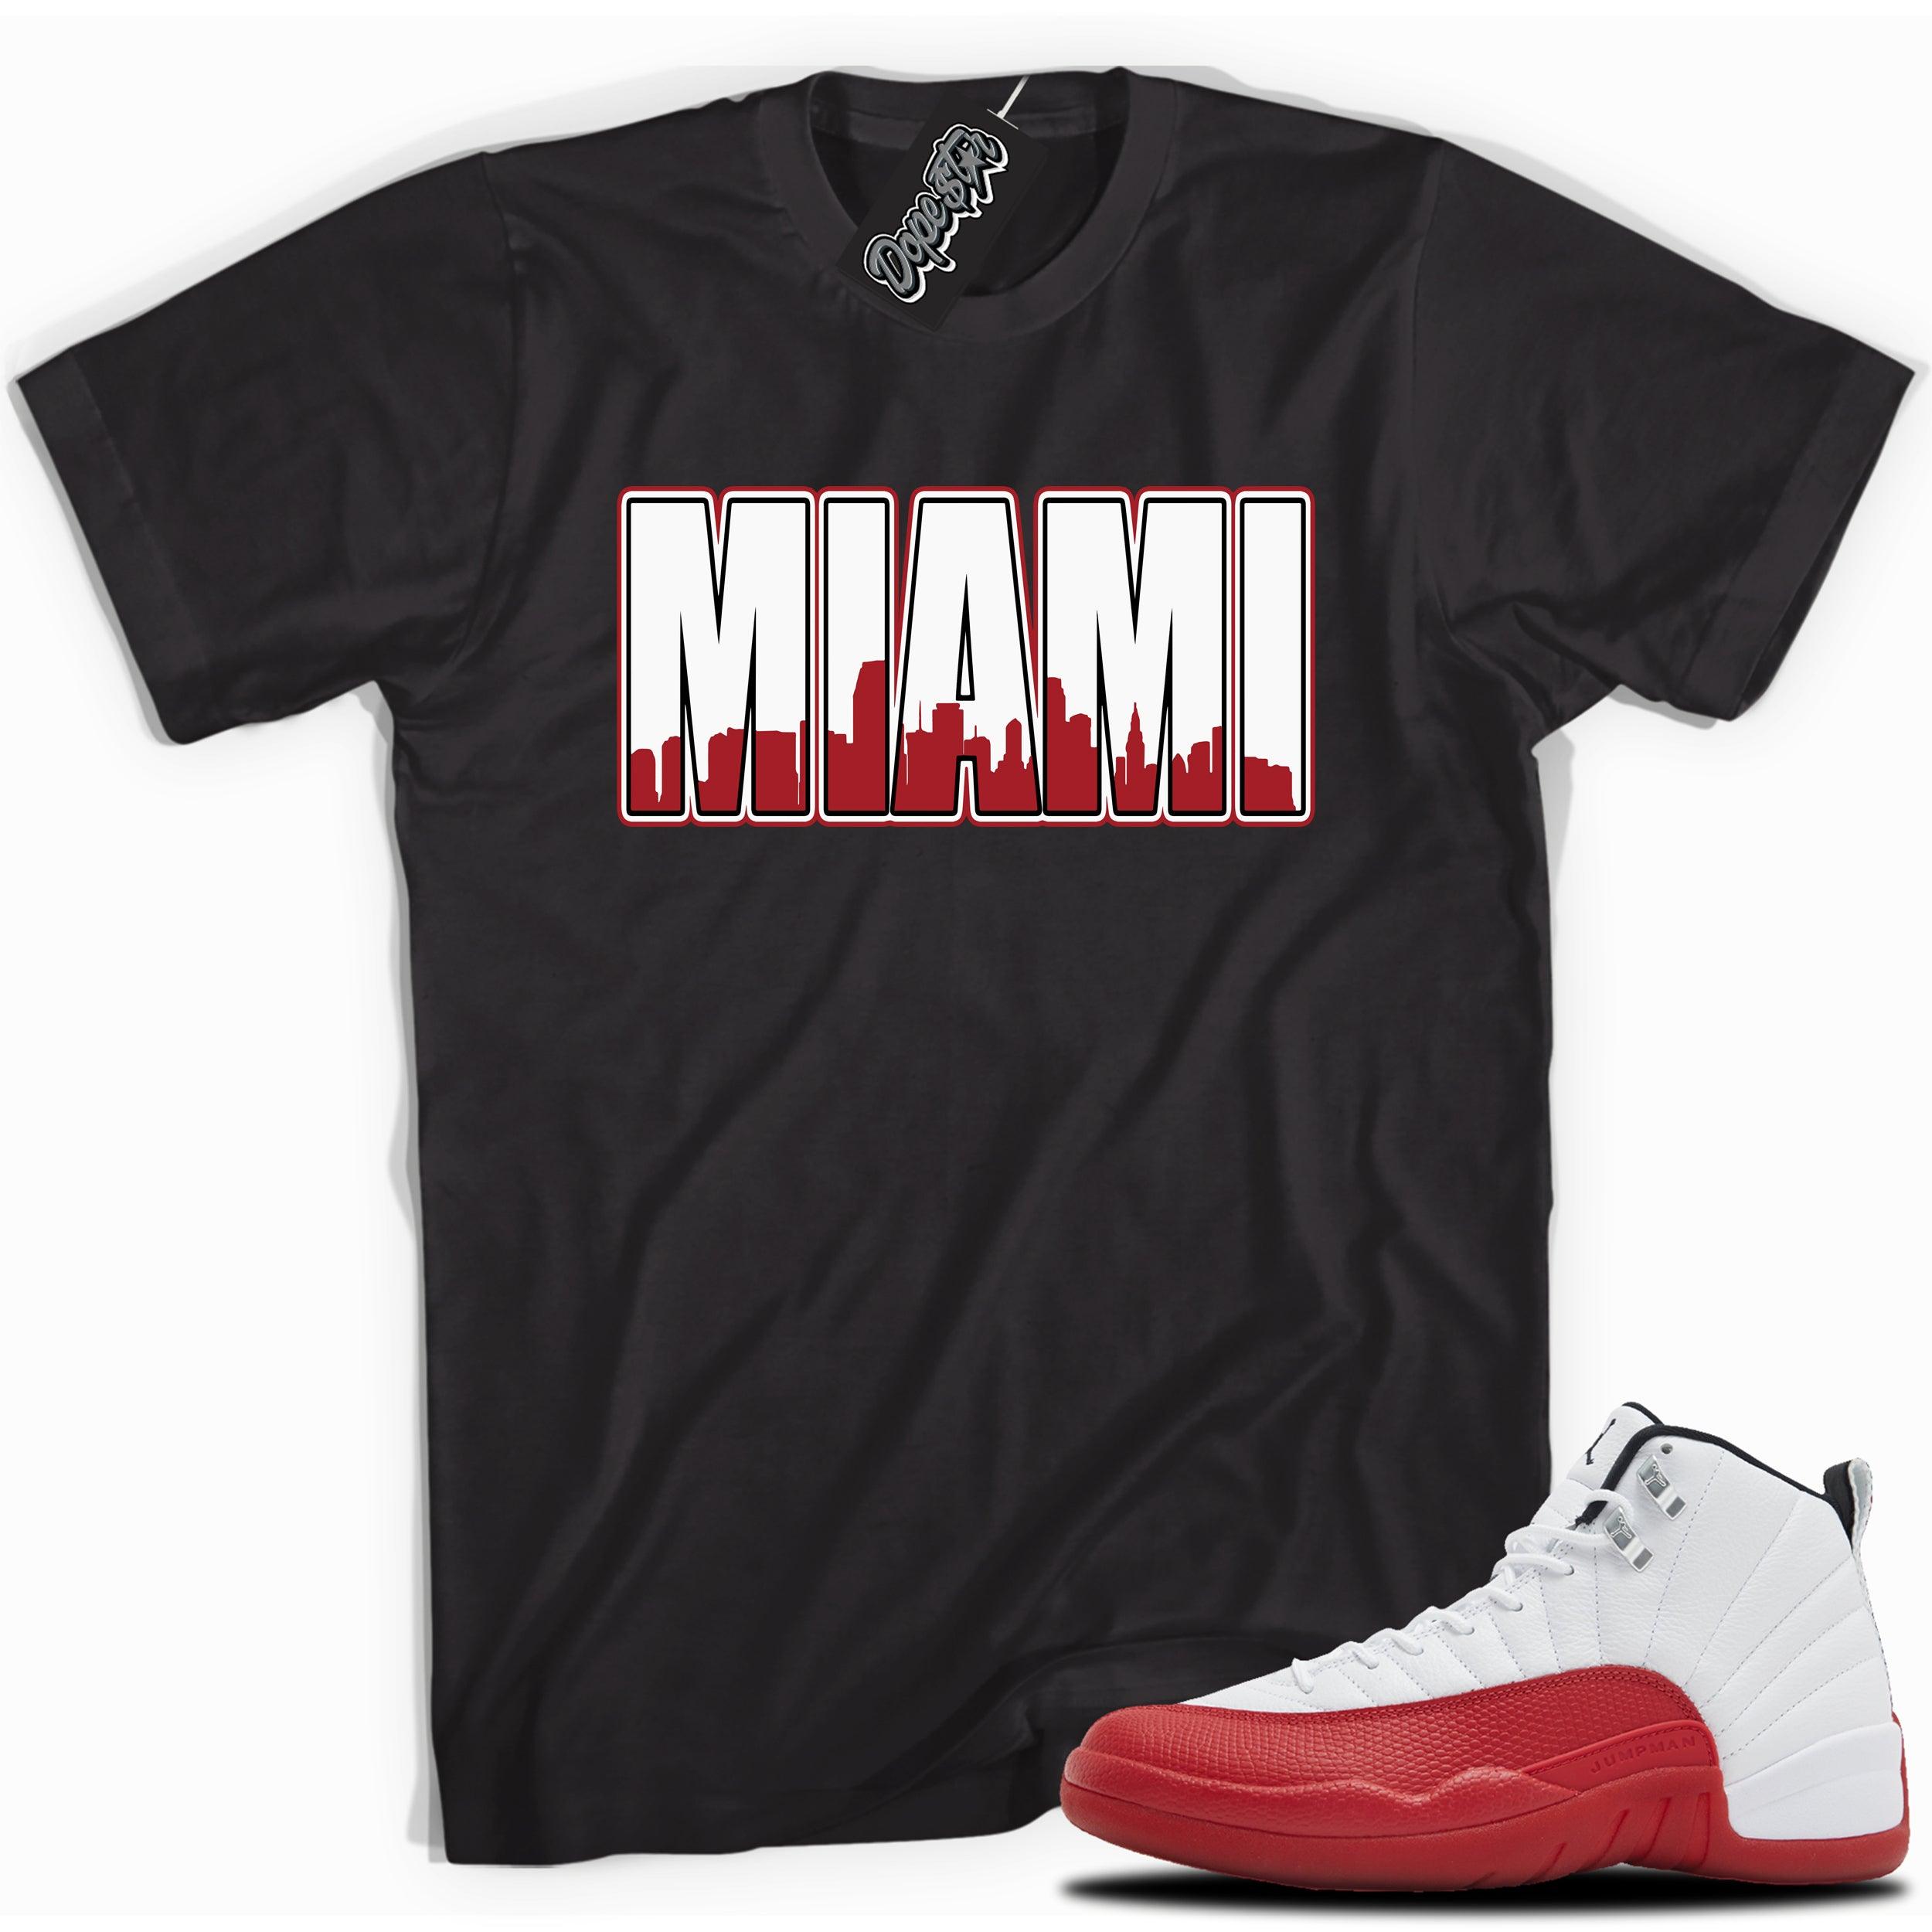 Cool Black graphic tee with “ MIAMI ” print, that perfectly matches Air Jordan 12 Retro Cherry Red 2023 red and white sneakers 